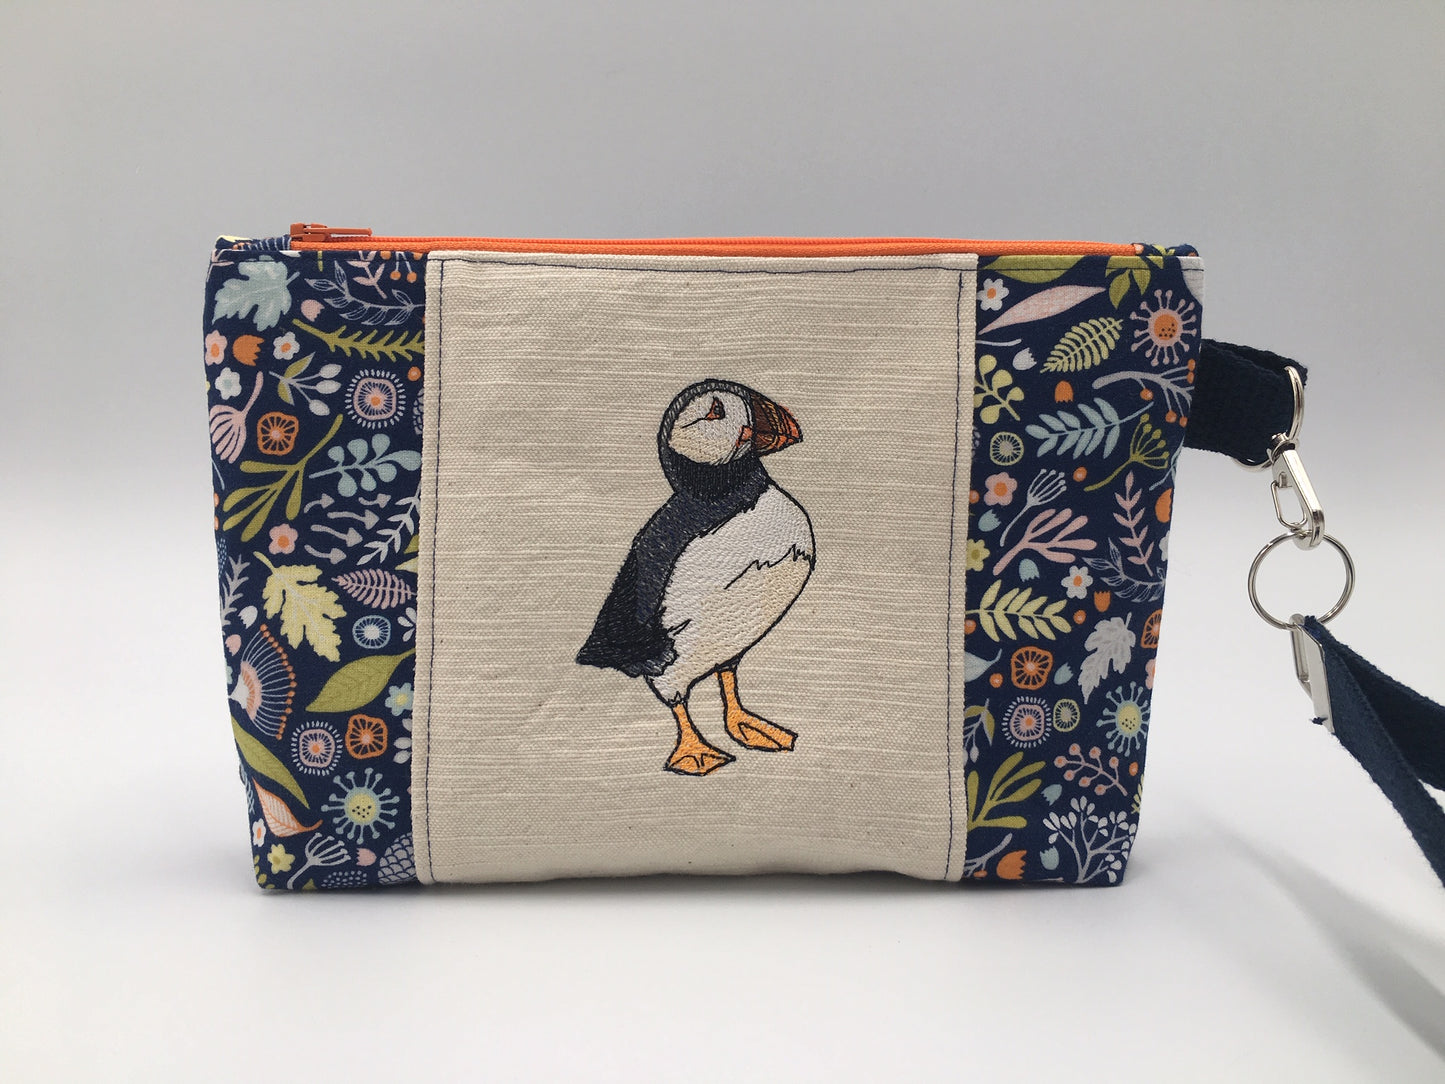 Puffin Rock Jacquard and Embroidery Grab-and-Go Zipper Bag